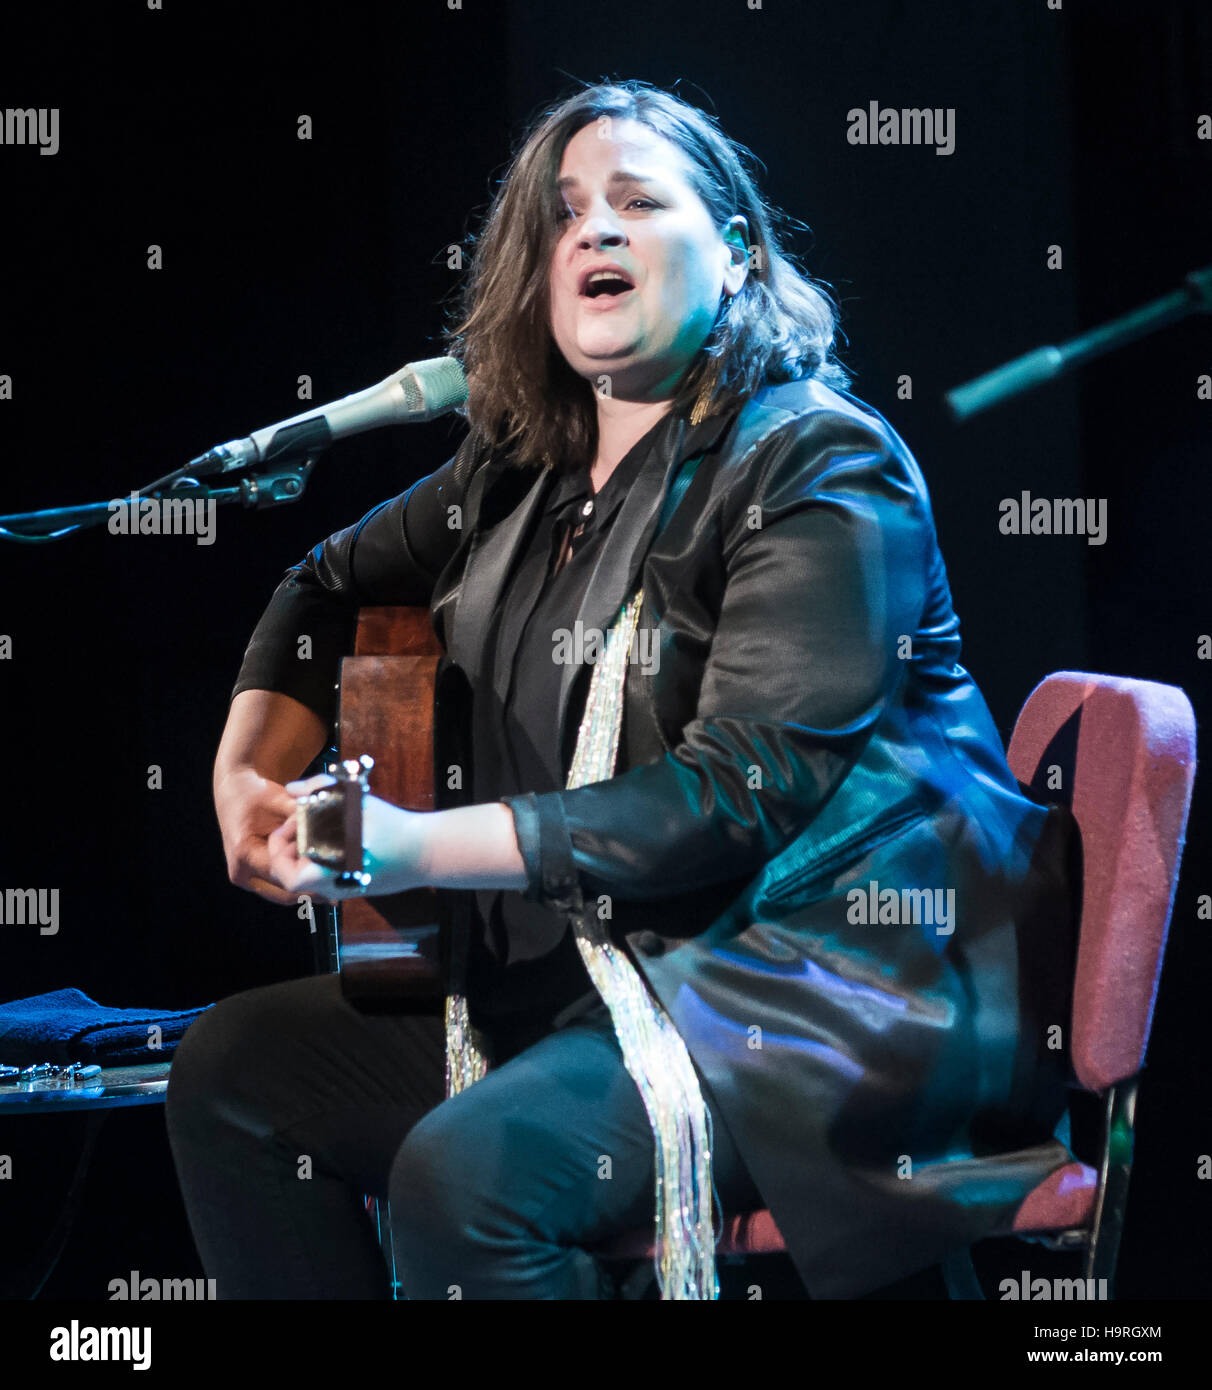 Barcelona, Spain. 25 November 2016. French-American jazz singer Madeleine Peyroux performs live on stage at Palau de la Musica during 2016 Voll-Damm Barcelona Jazz Festival. Credit:  Victor Puig/Alamy Live News Stock Photo